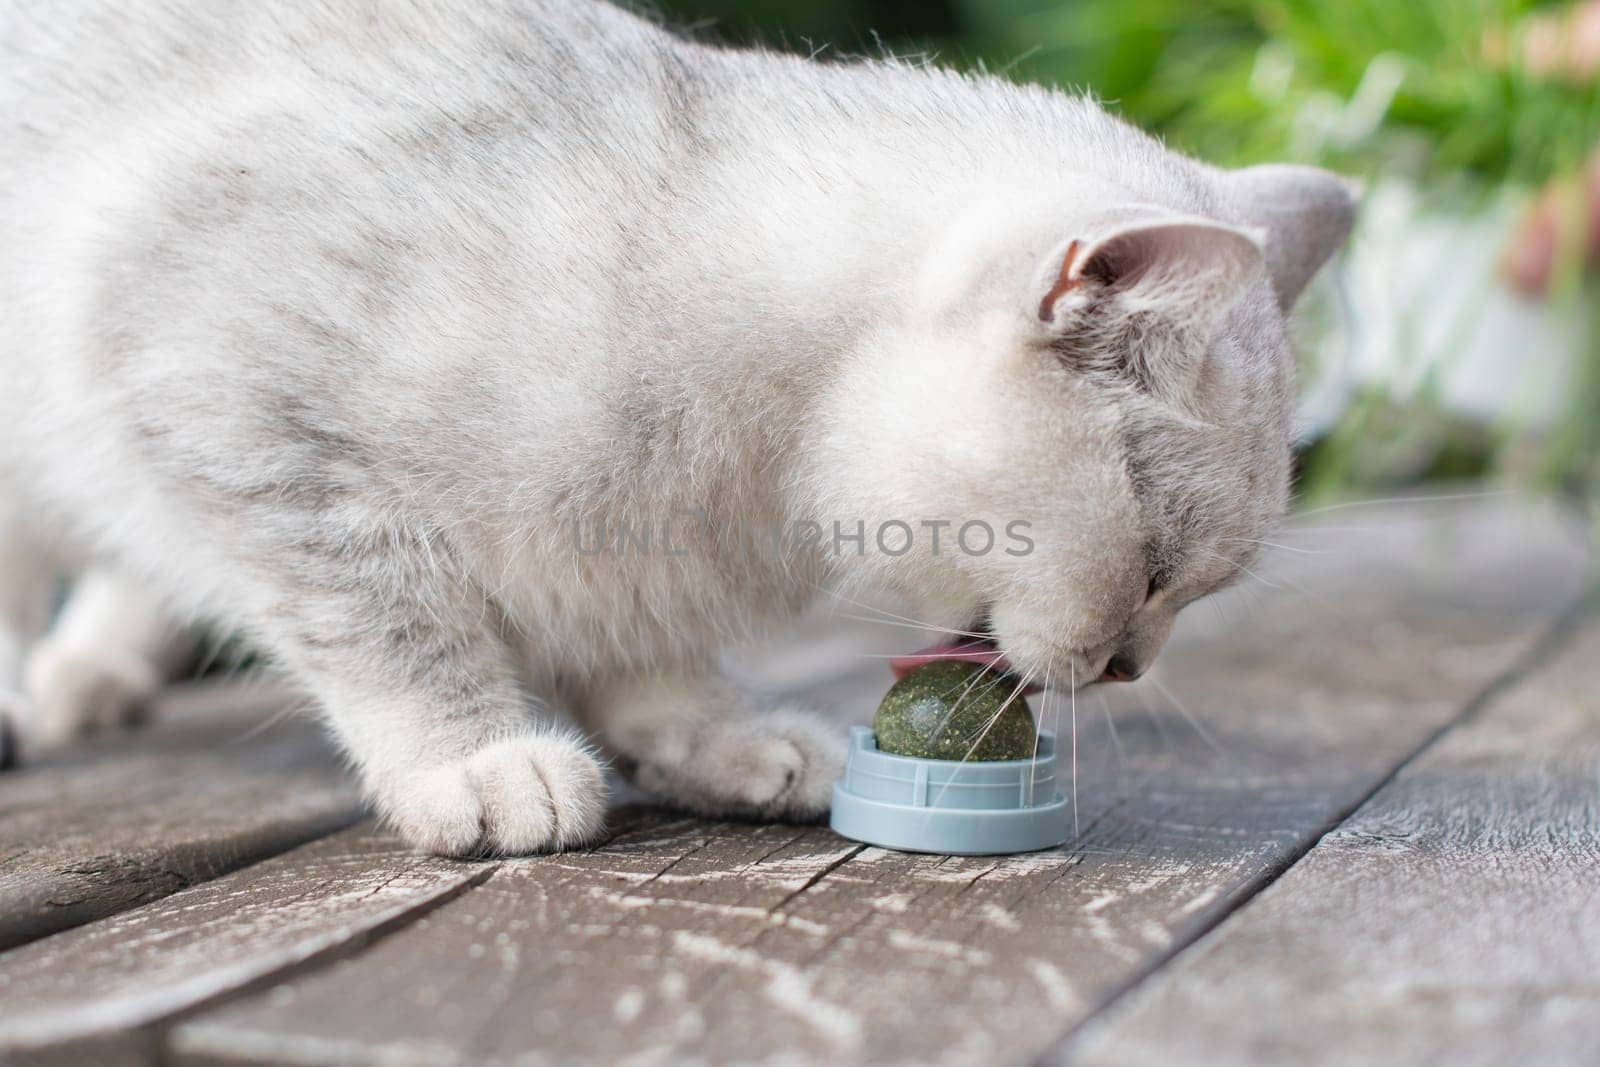 Scottish kitten, Playful cat has fun with a catnip ball toy, Favorite activity of furry pets, An exciting toy treat for your beloved pet, High quality photo